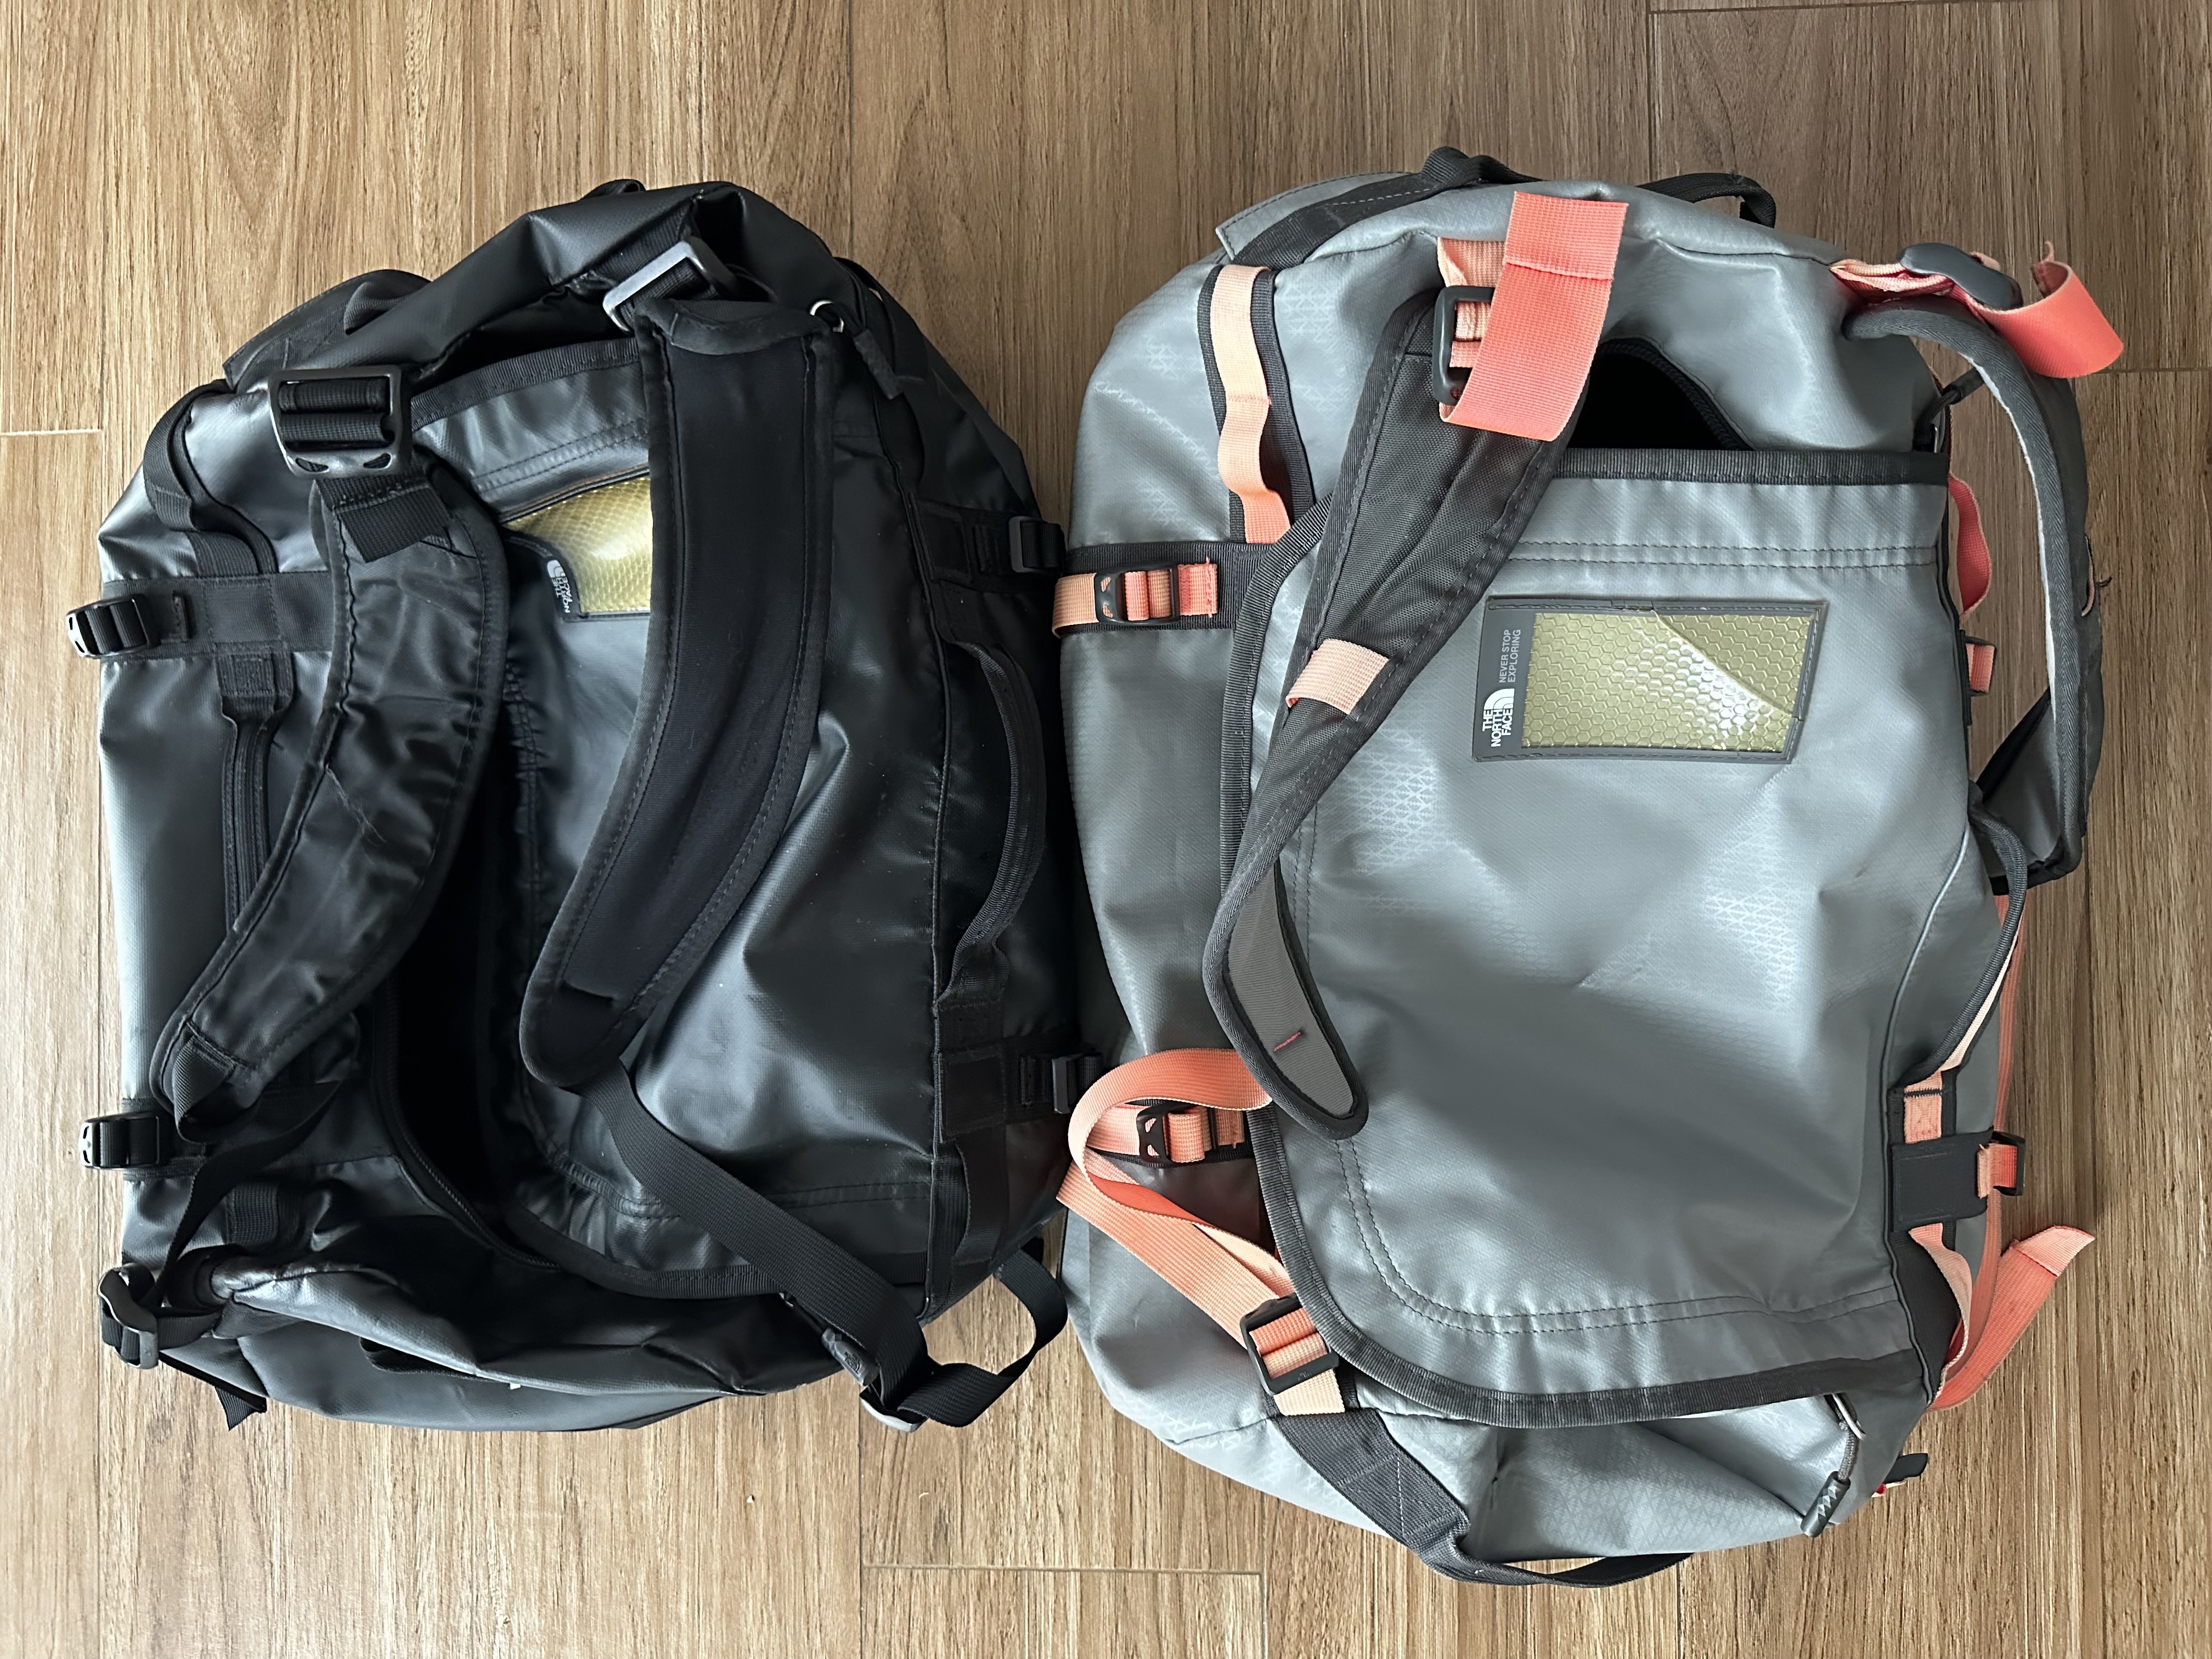 Two well-used North Face Base Camp Duffels